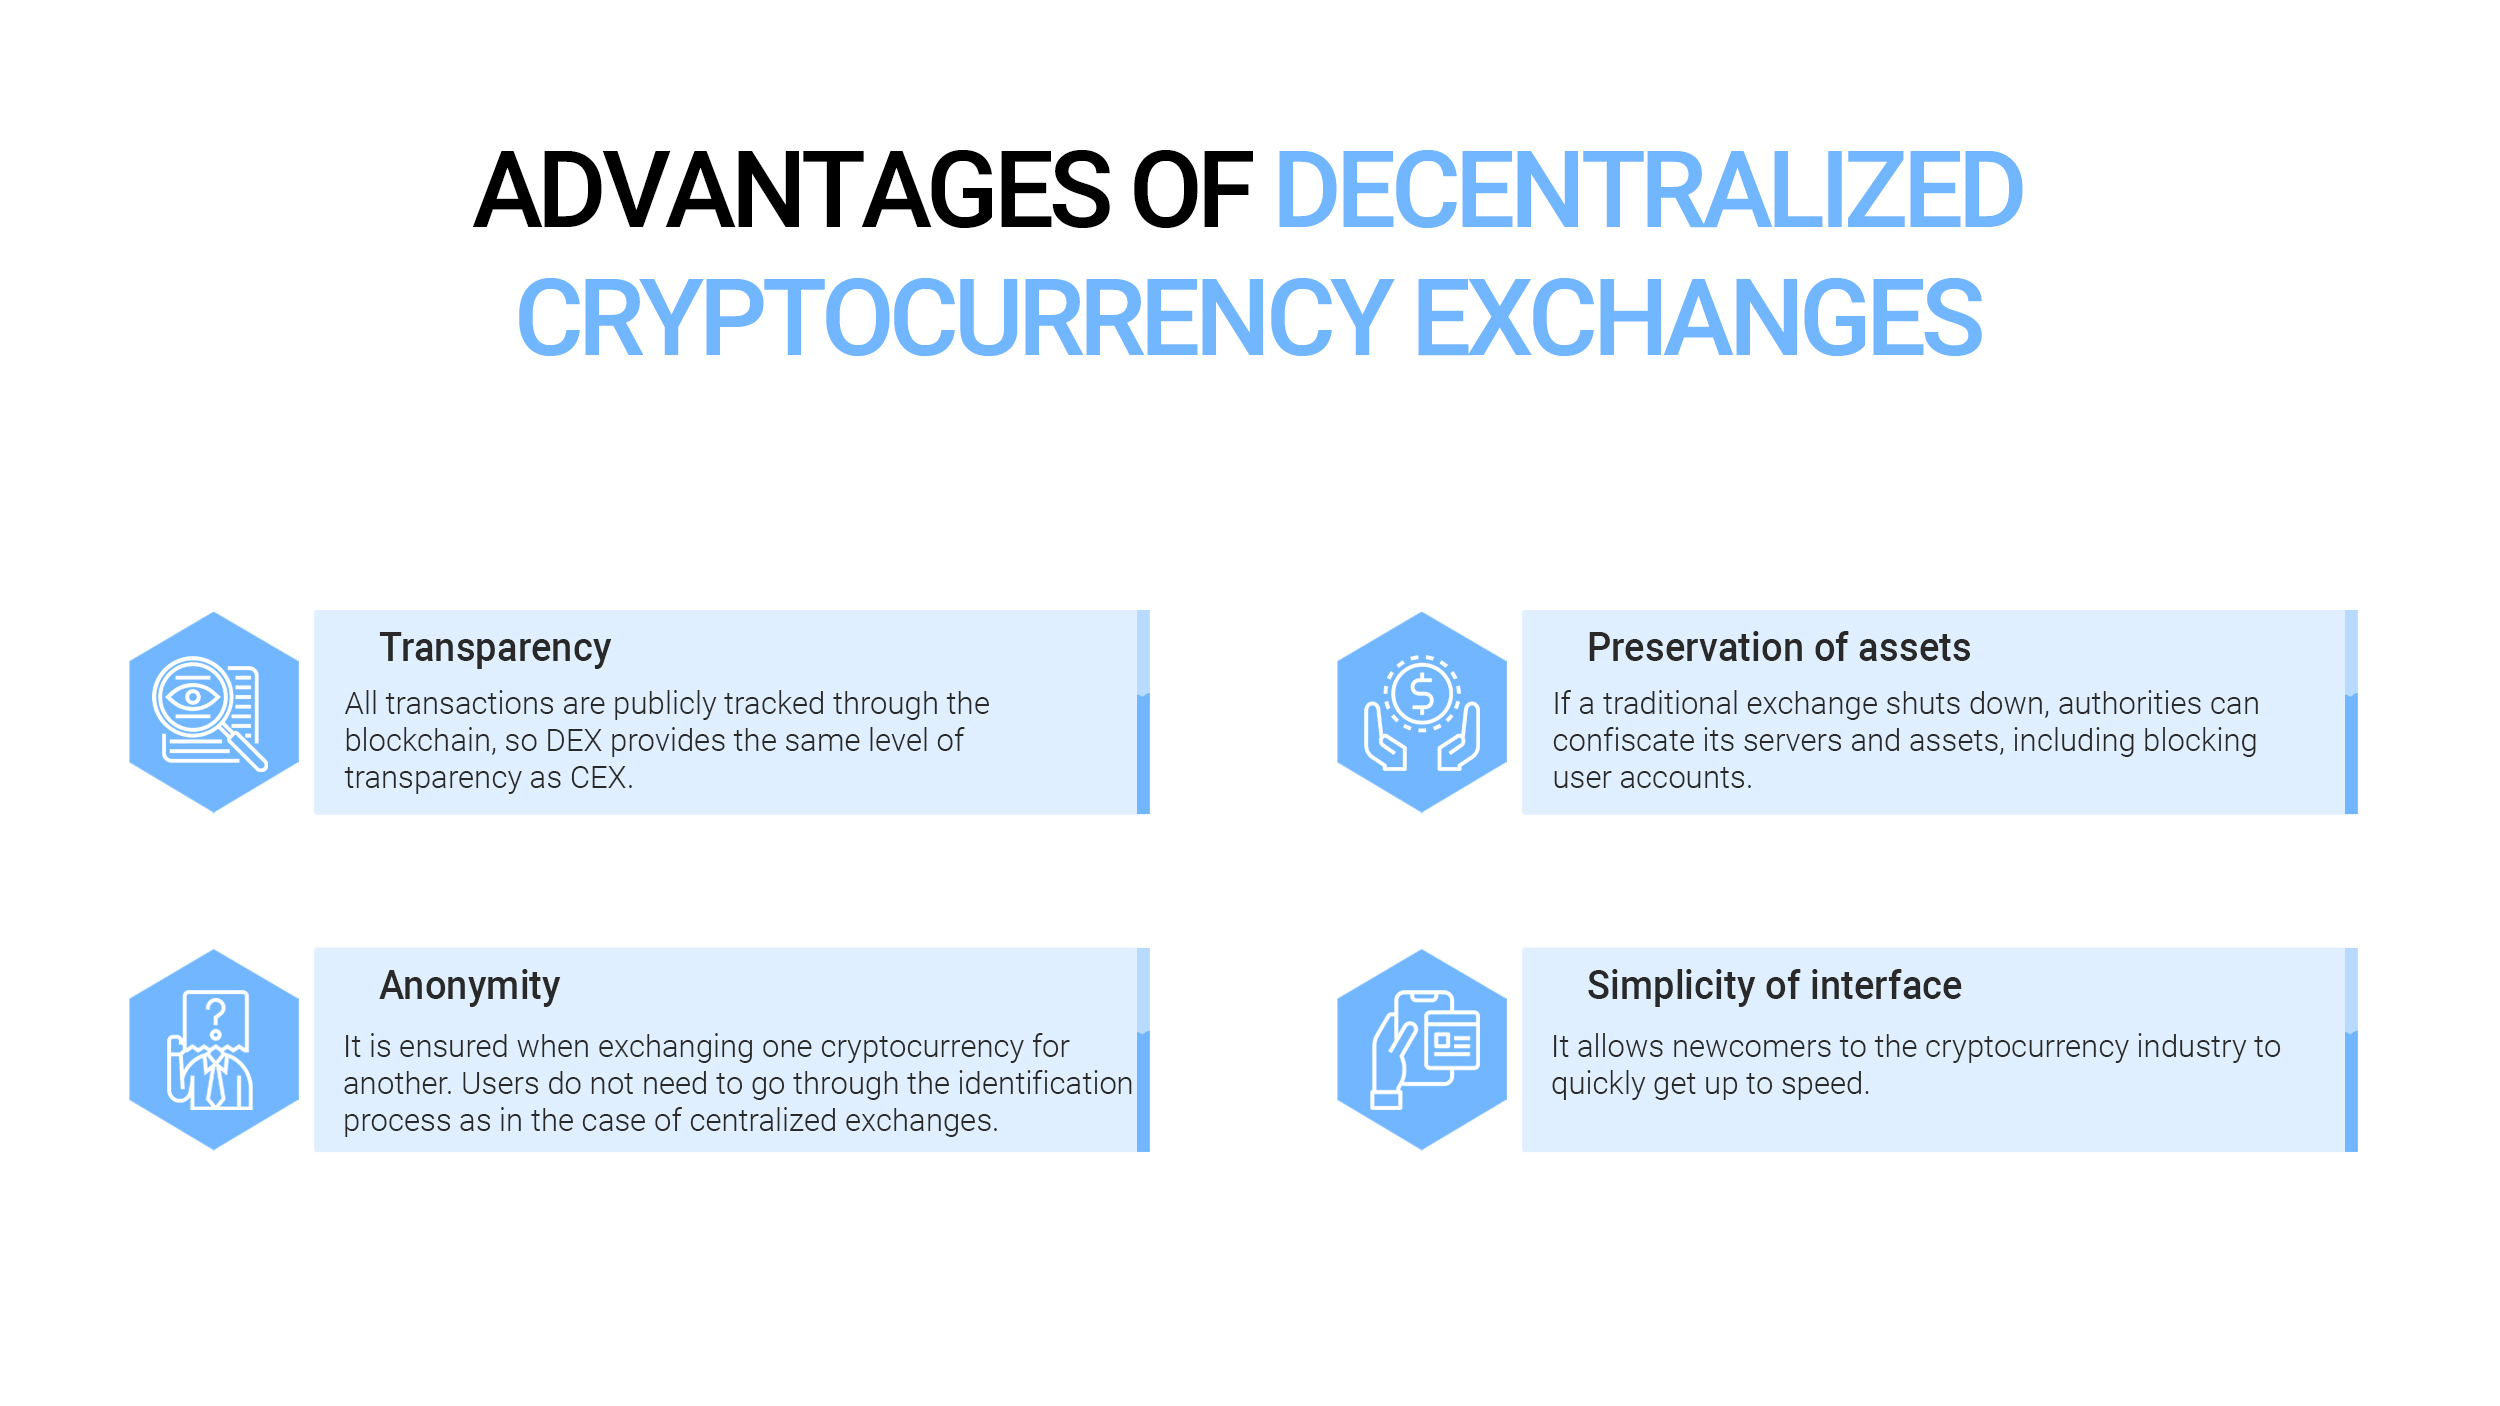 Advantages of Decentralized Cryptocurrency Exchanges